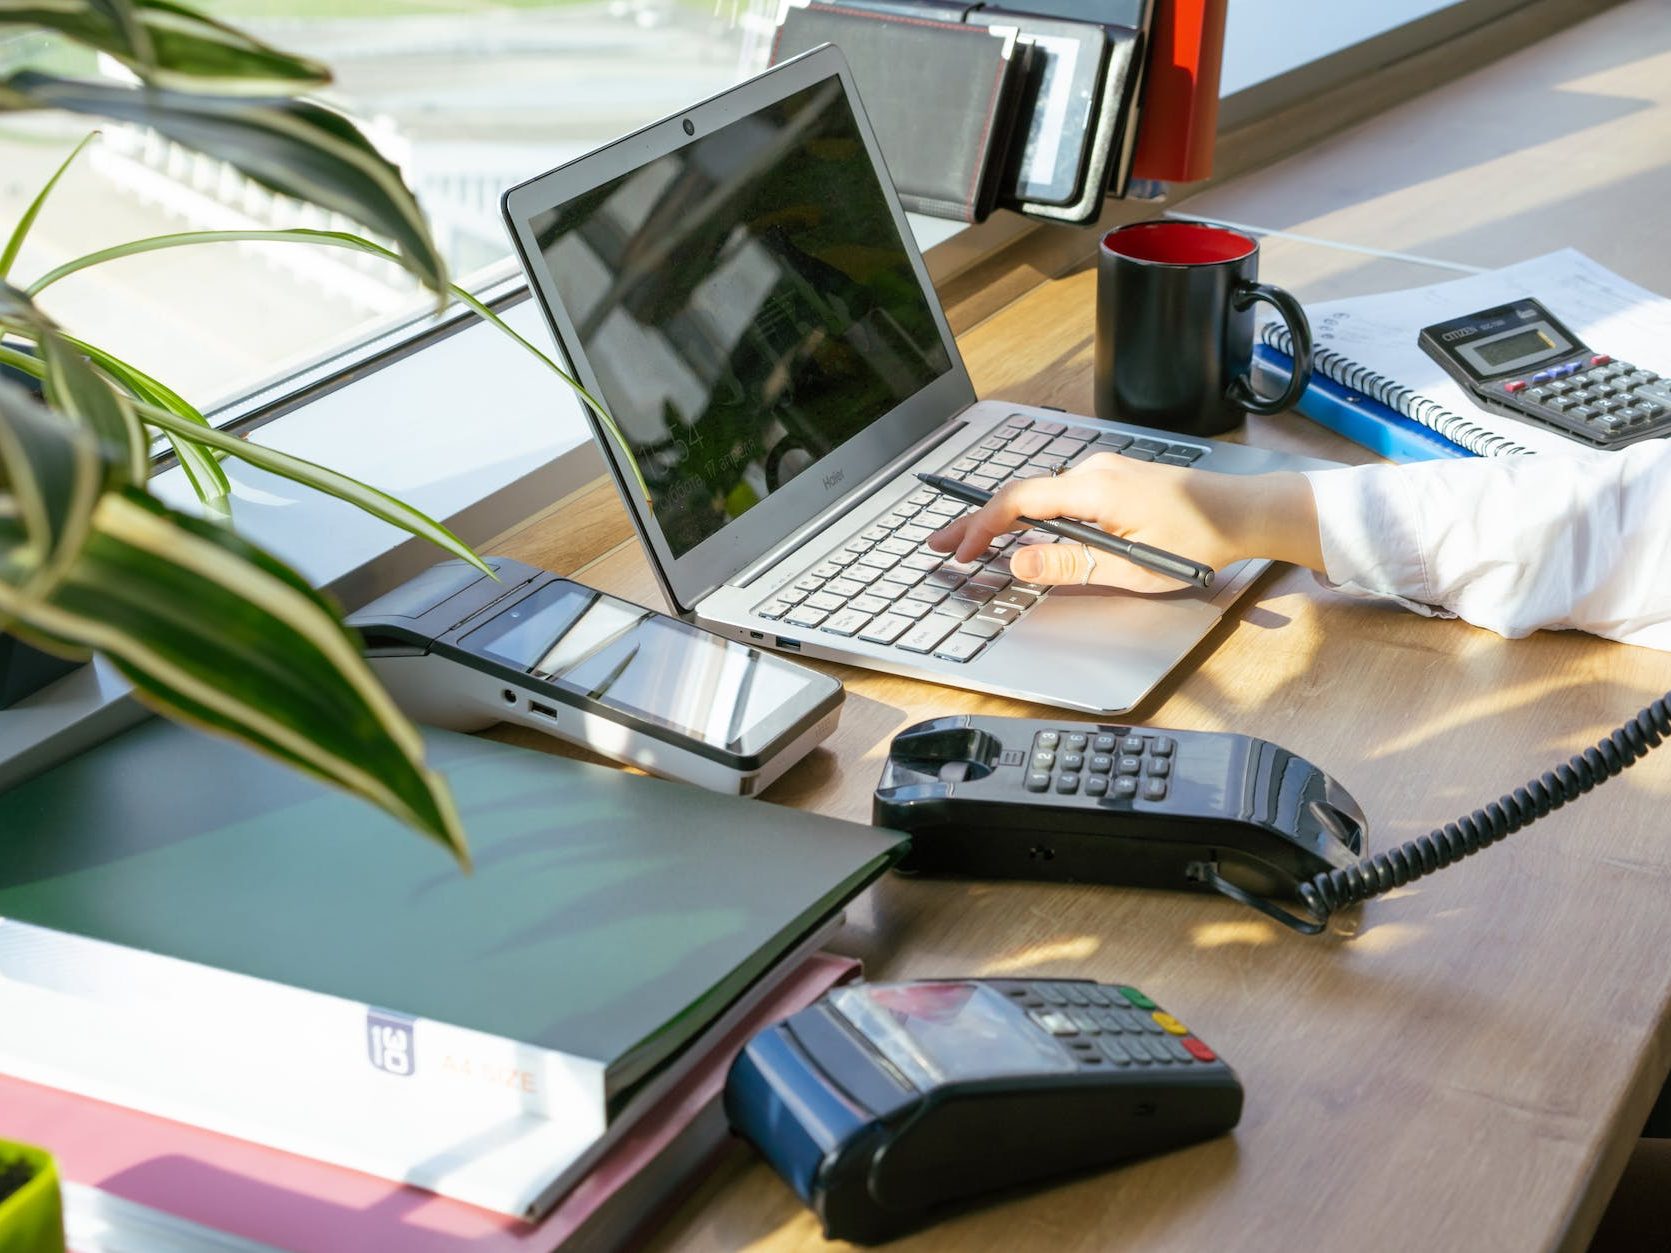 electronic devices used in an office